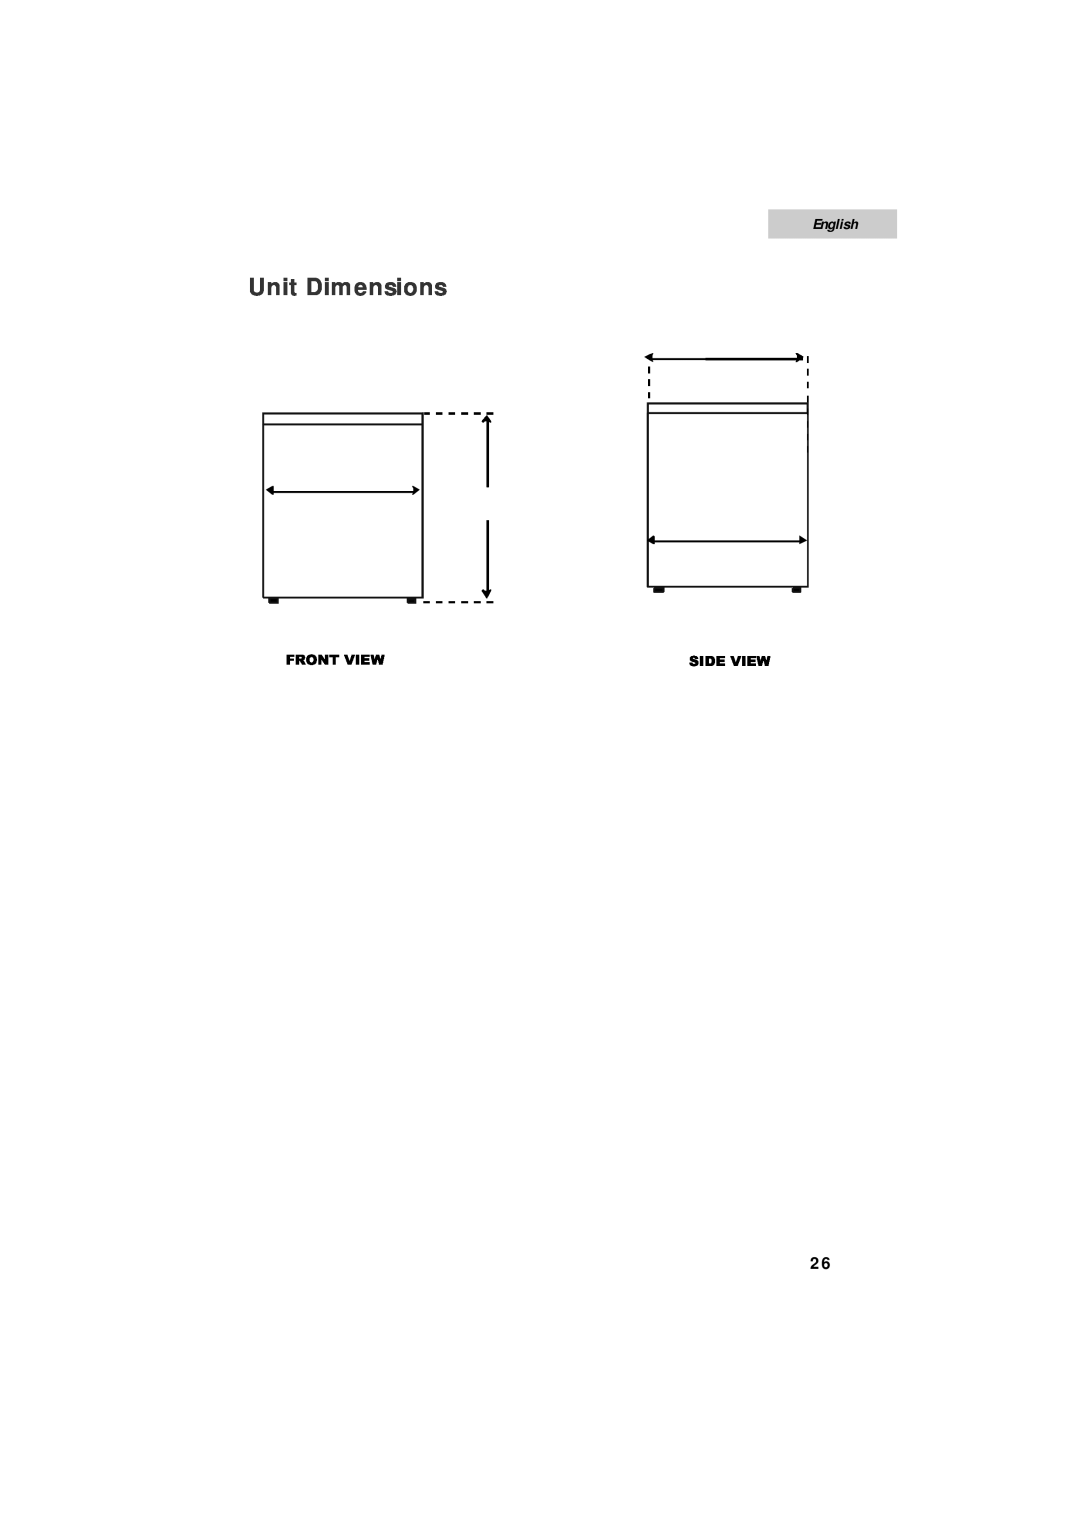 Summit SPW1200P user manual Unit Dimensions, English, Front View, Side View 